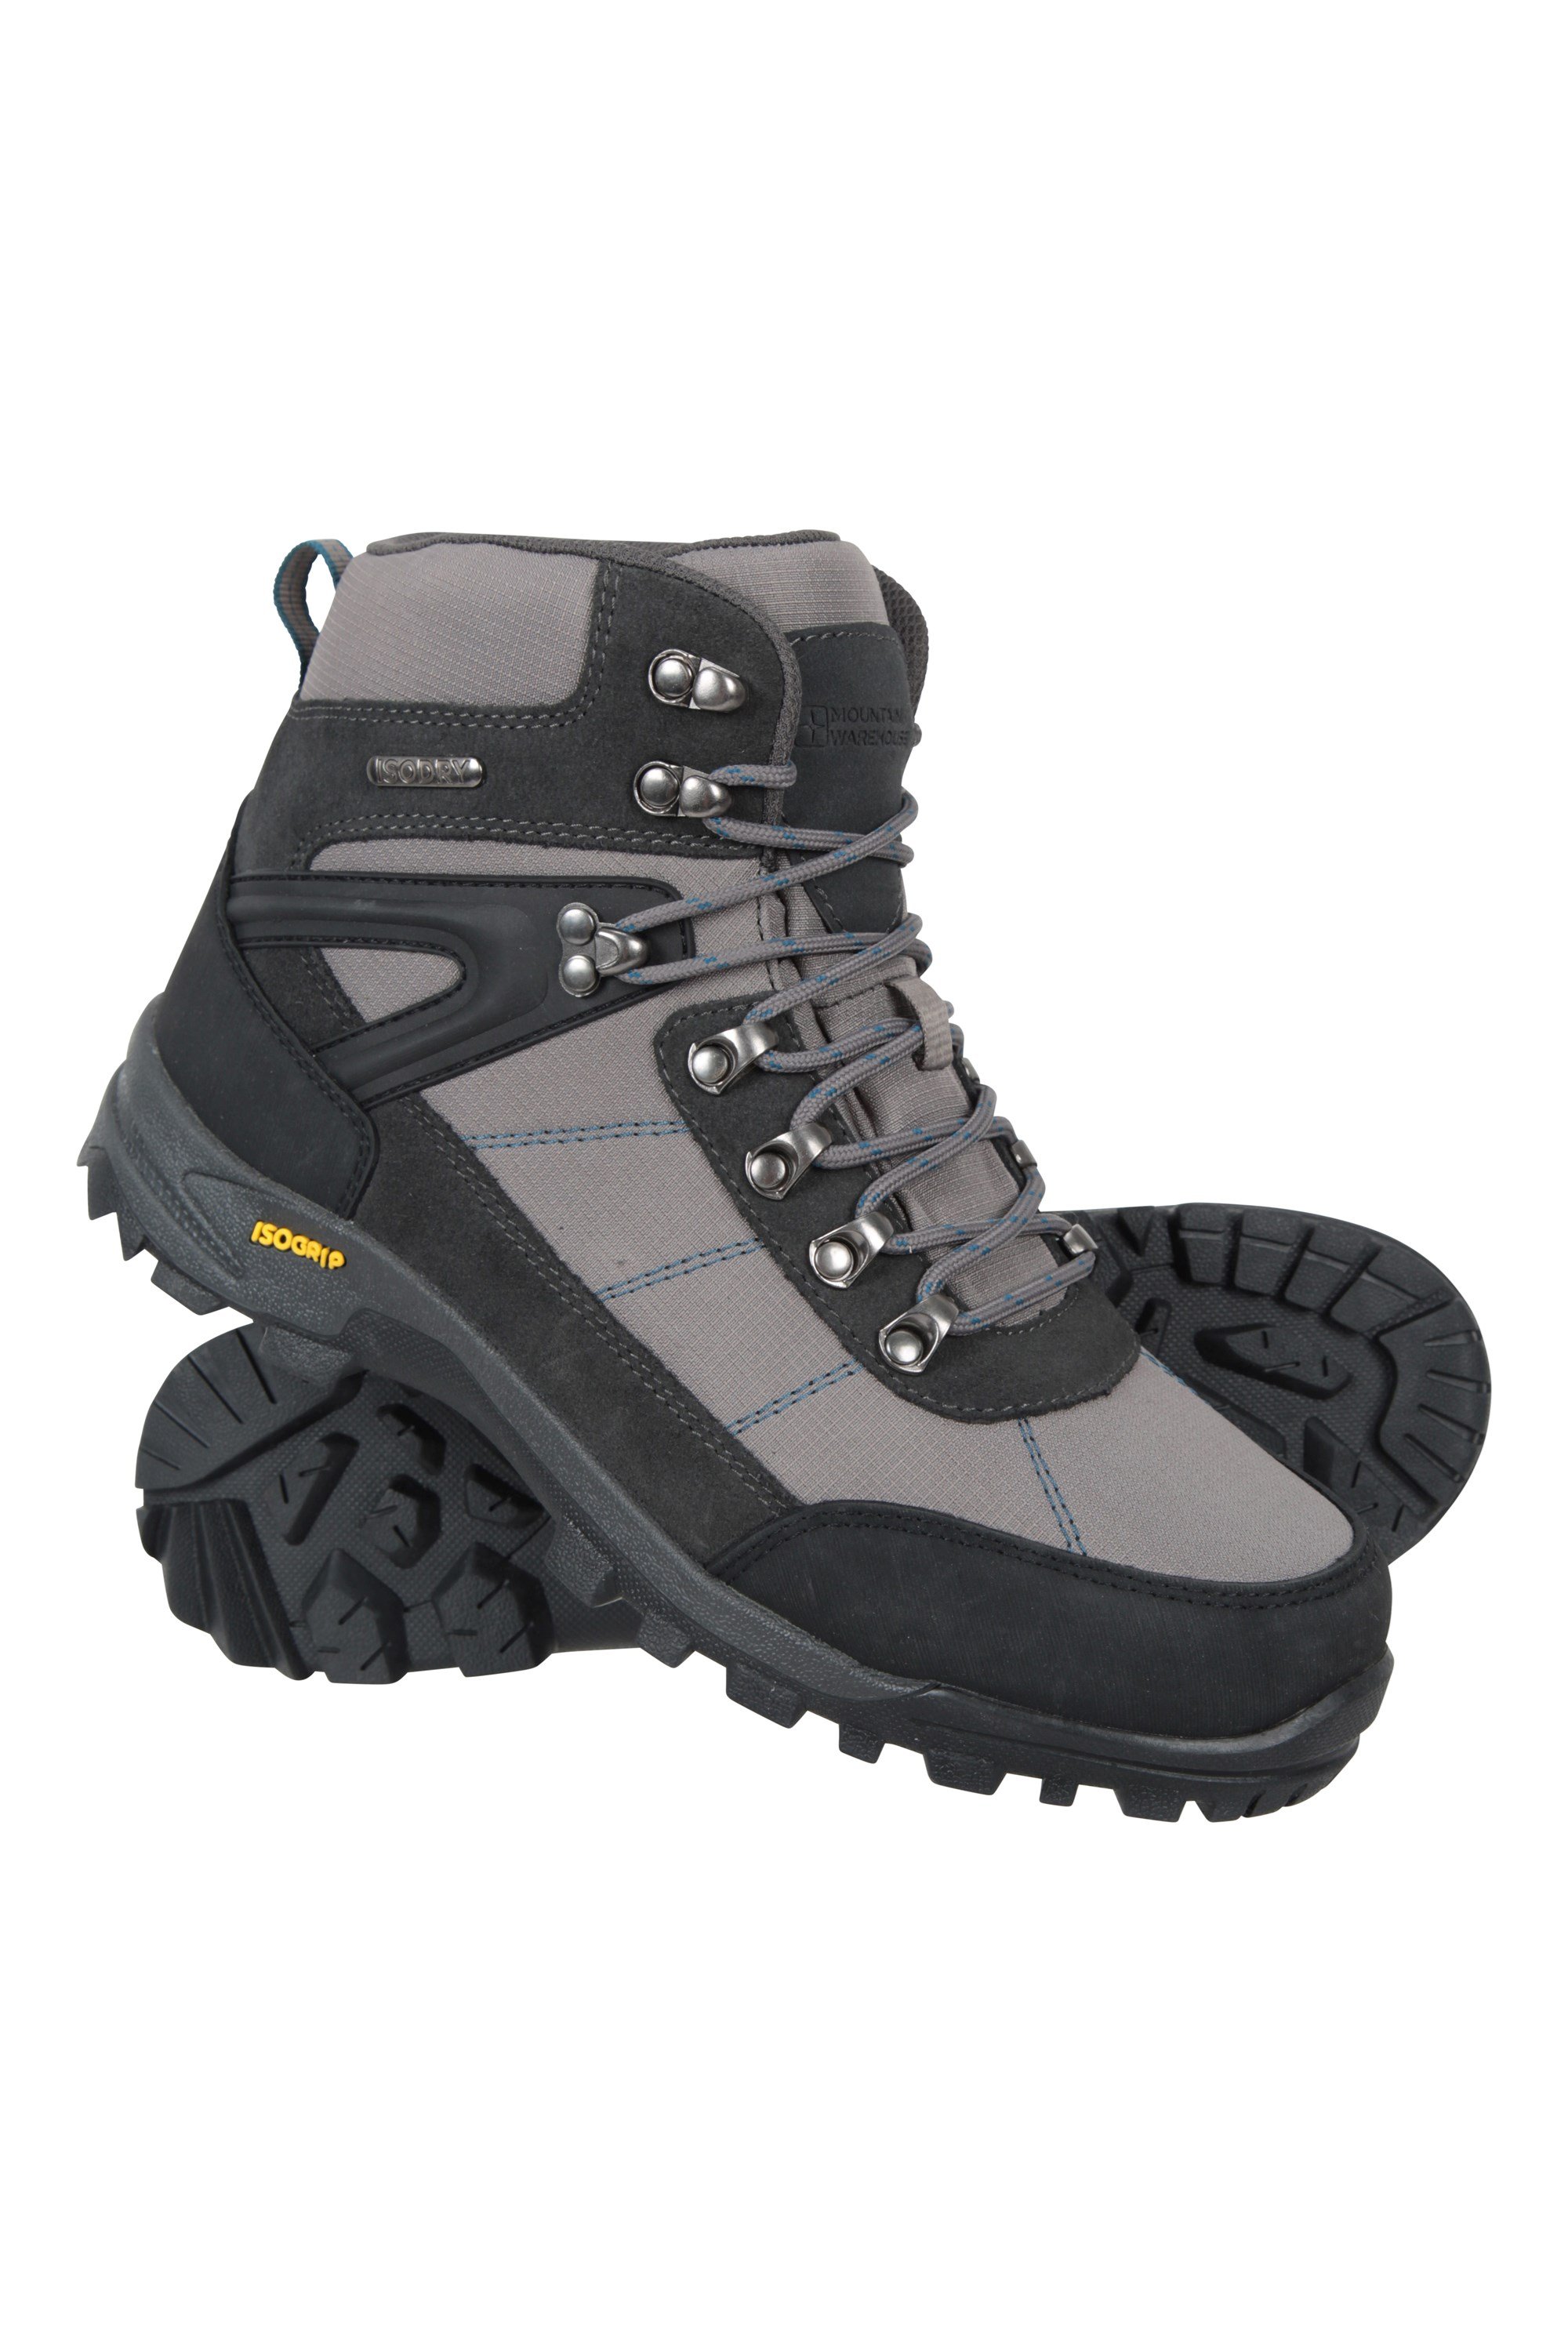 025909 STORM EXTREME ISOGRIP WATERPROOF HIKING BOOT